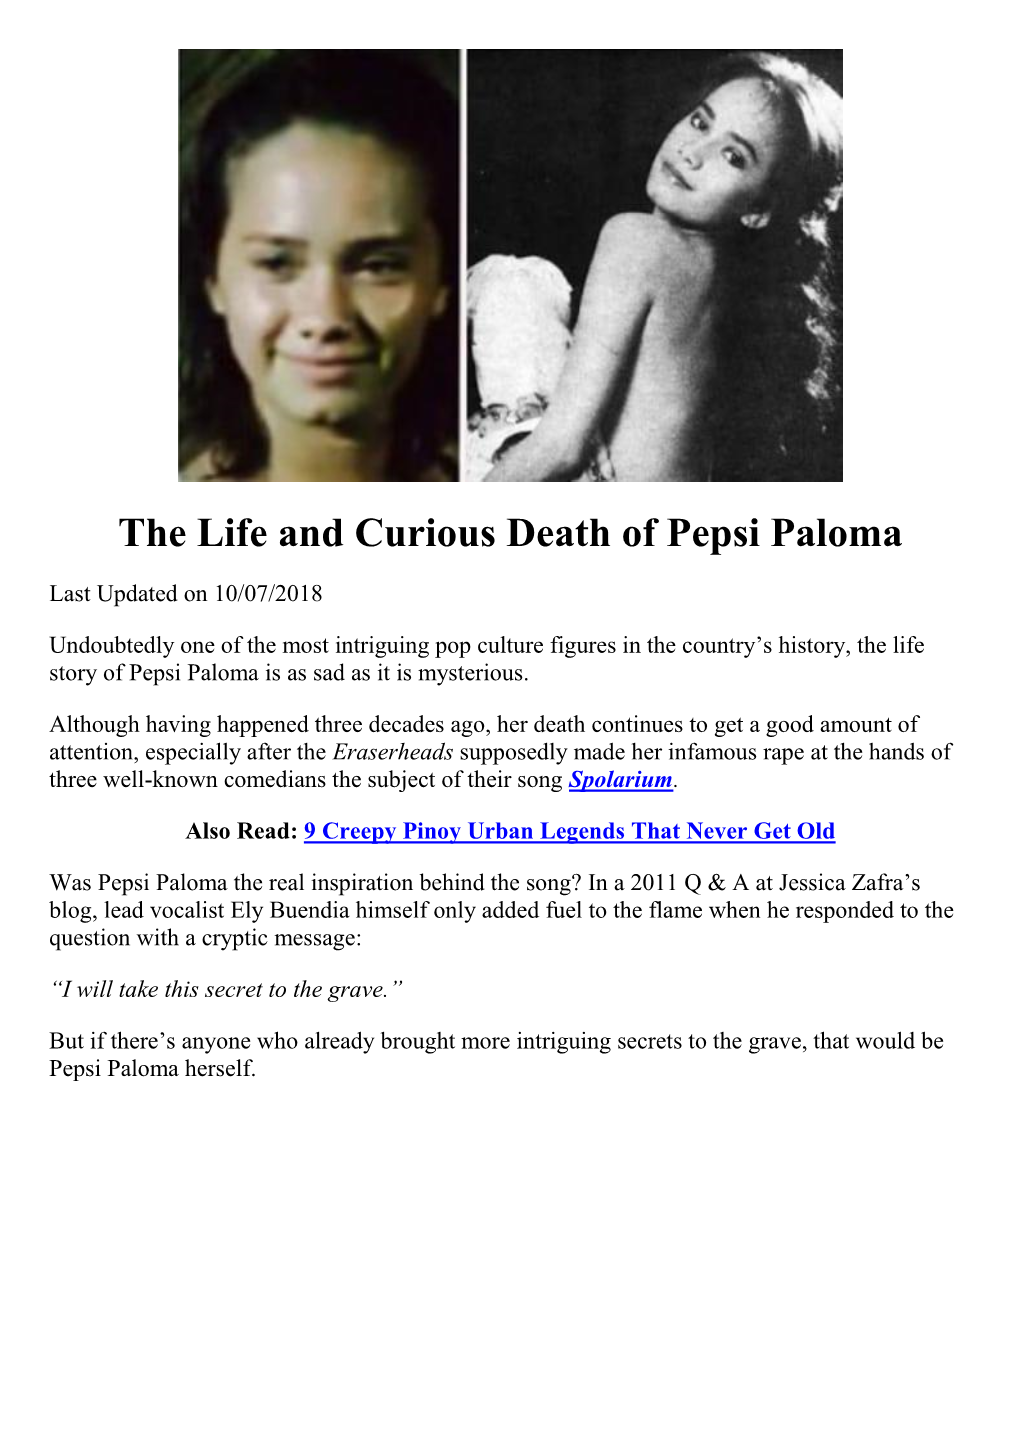 The Life and Curious Death of Pepsi Paloma